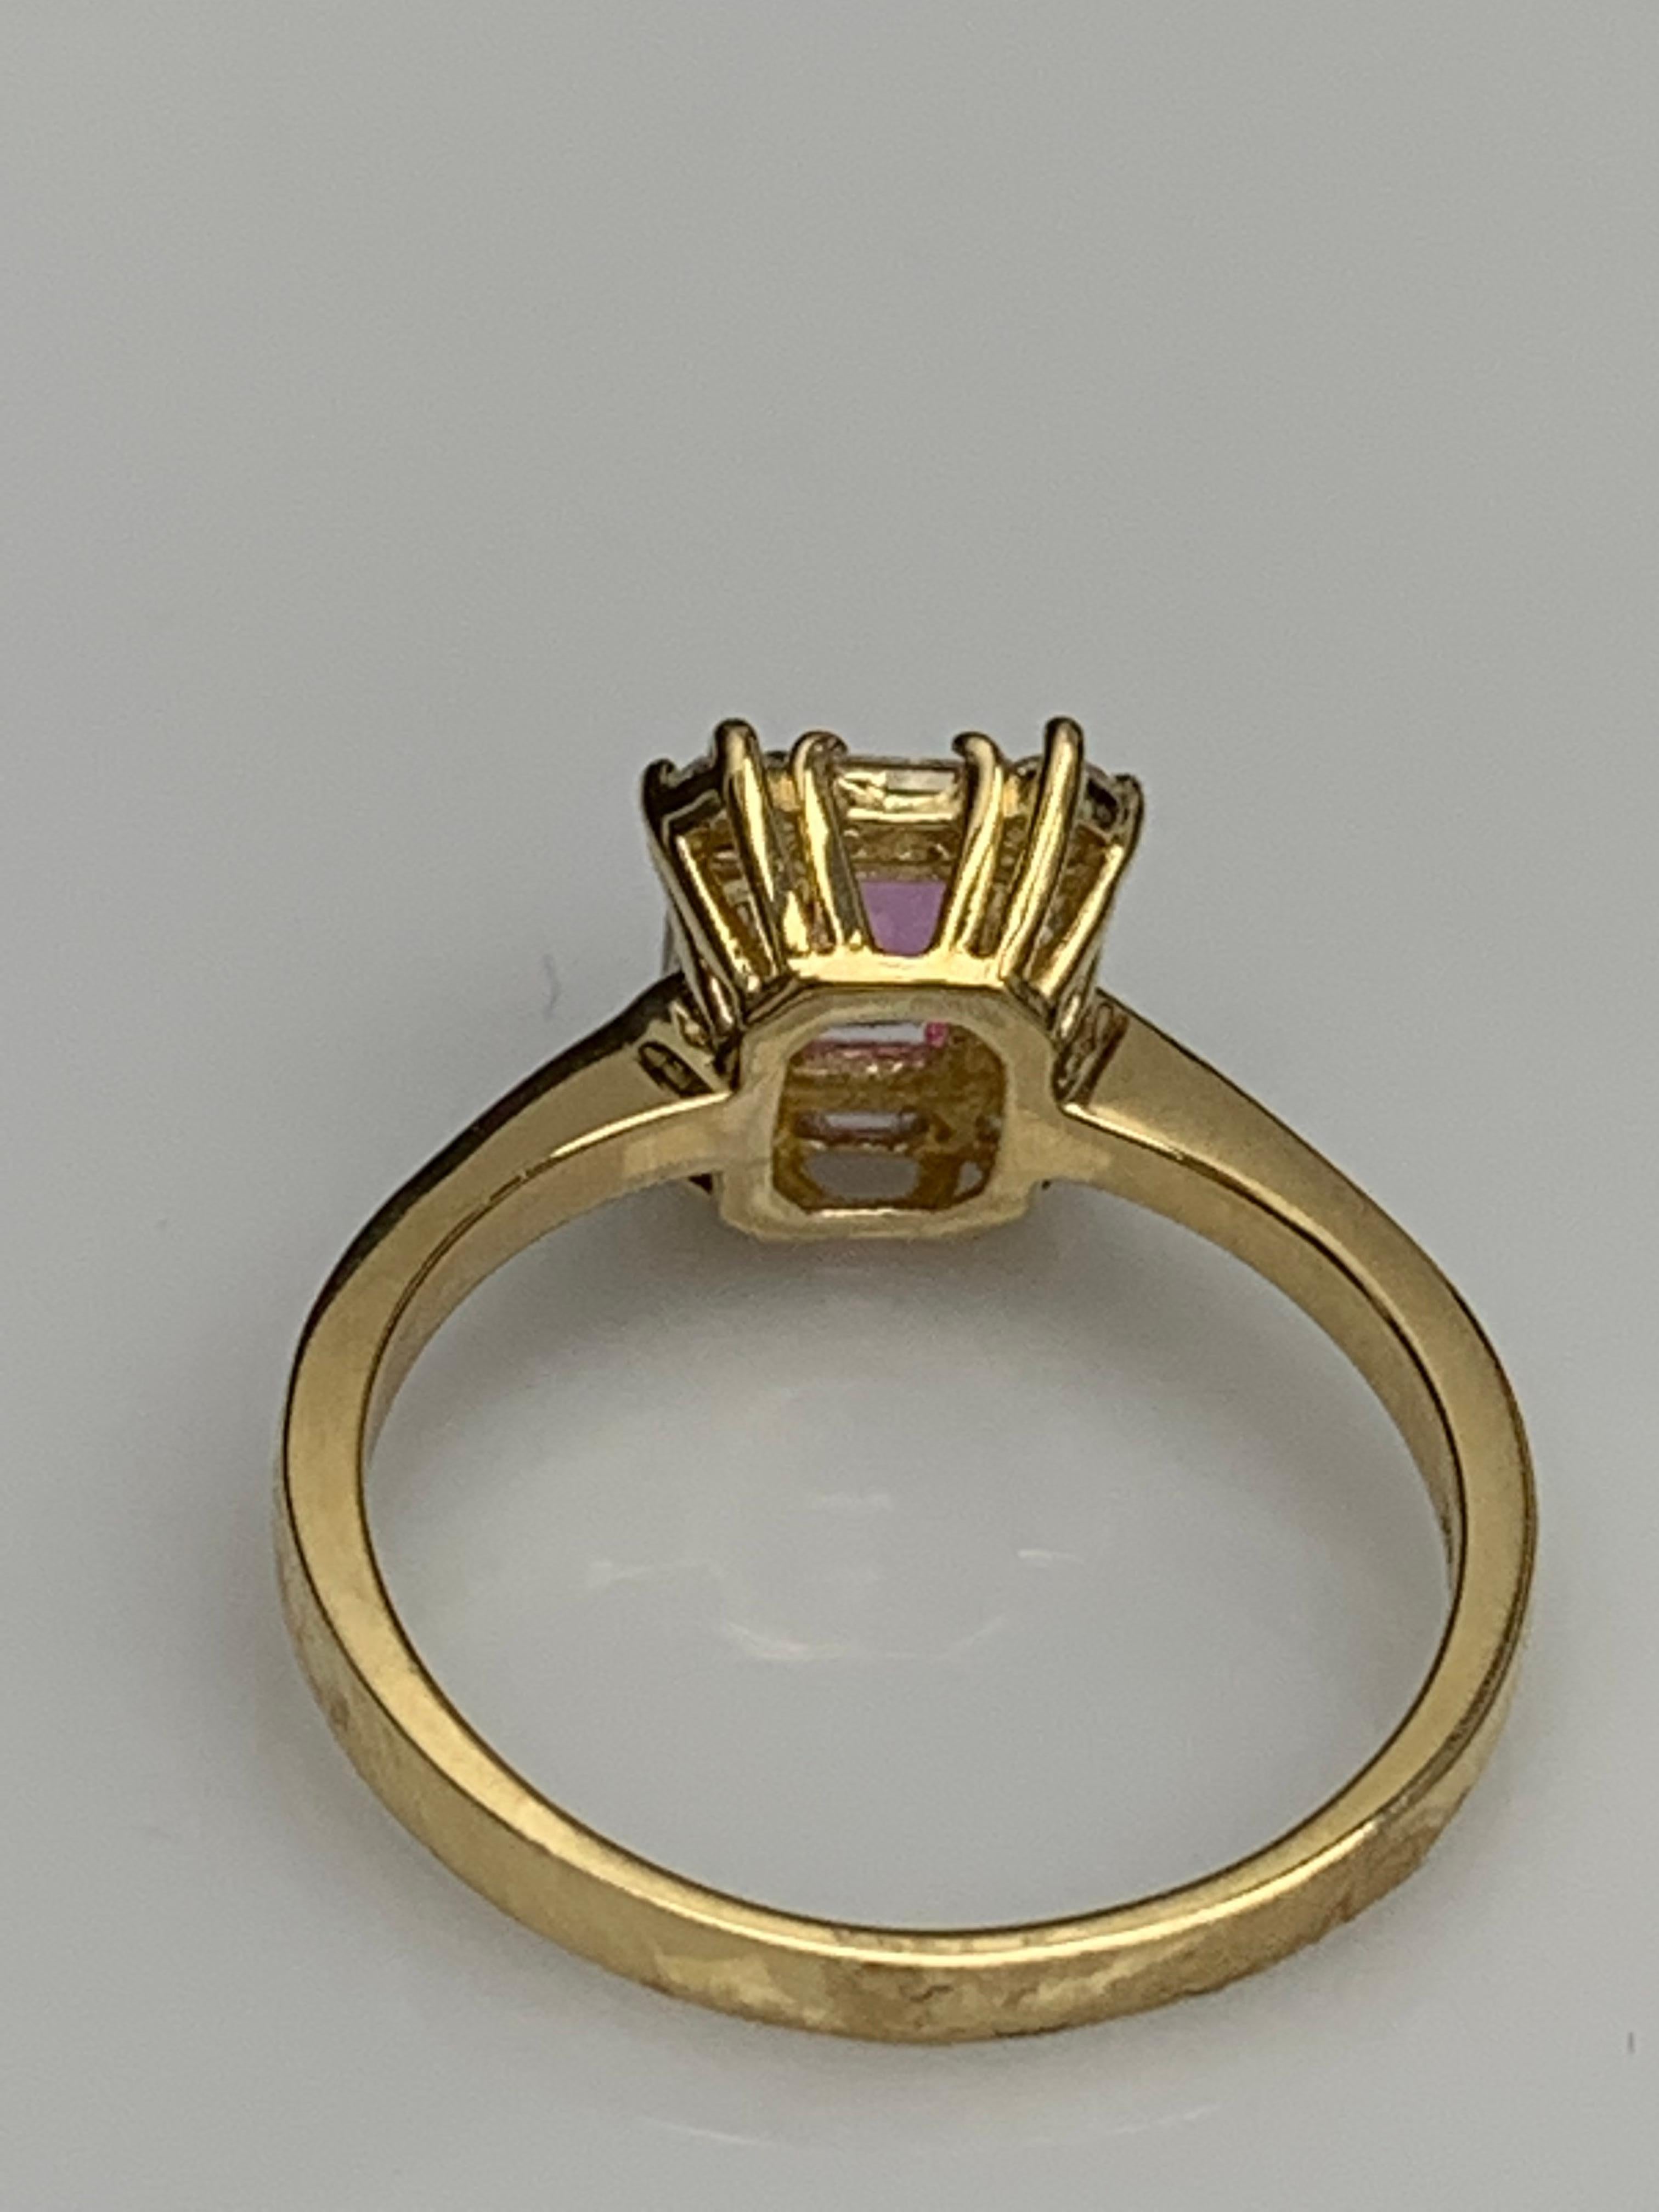 0.55 Carat Emerald Cut Pink Sapphire and Diamond Ring 14K Yellow Gold For Sale 8